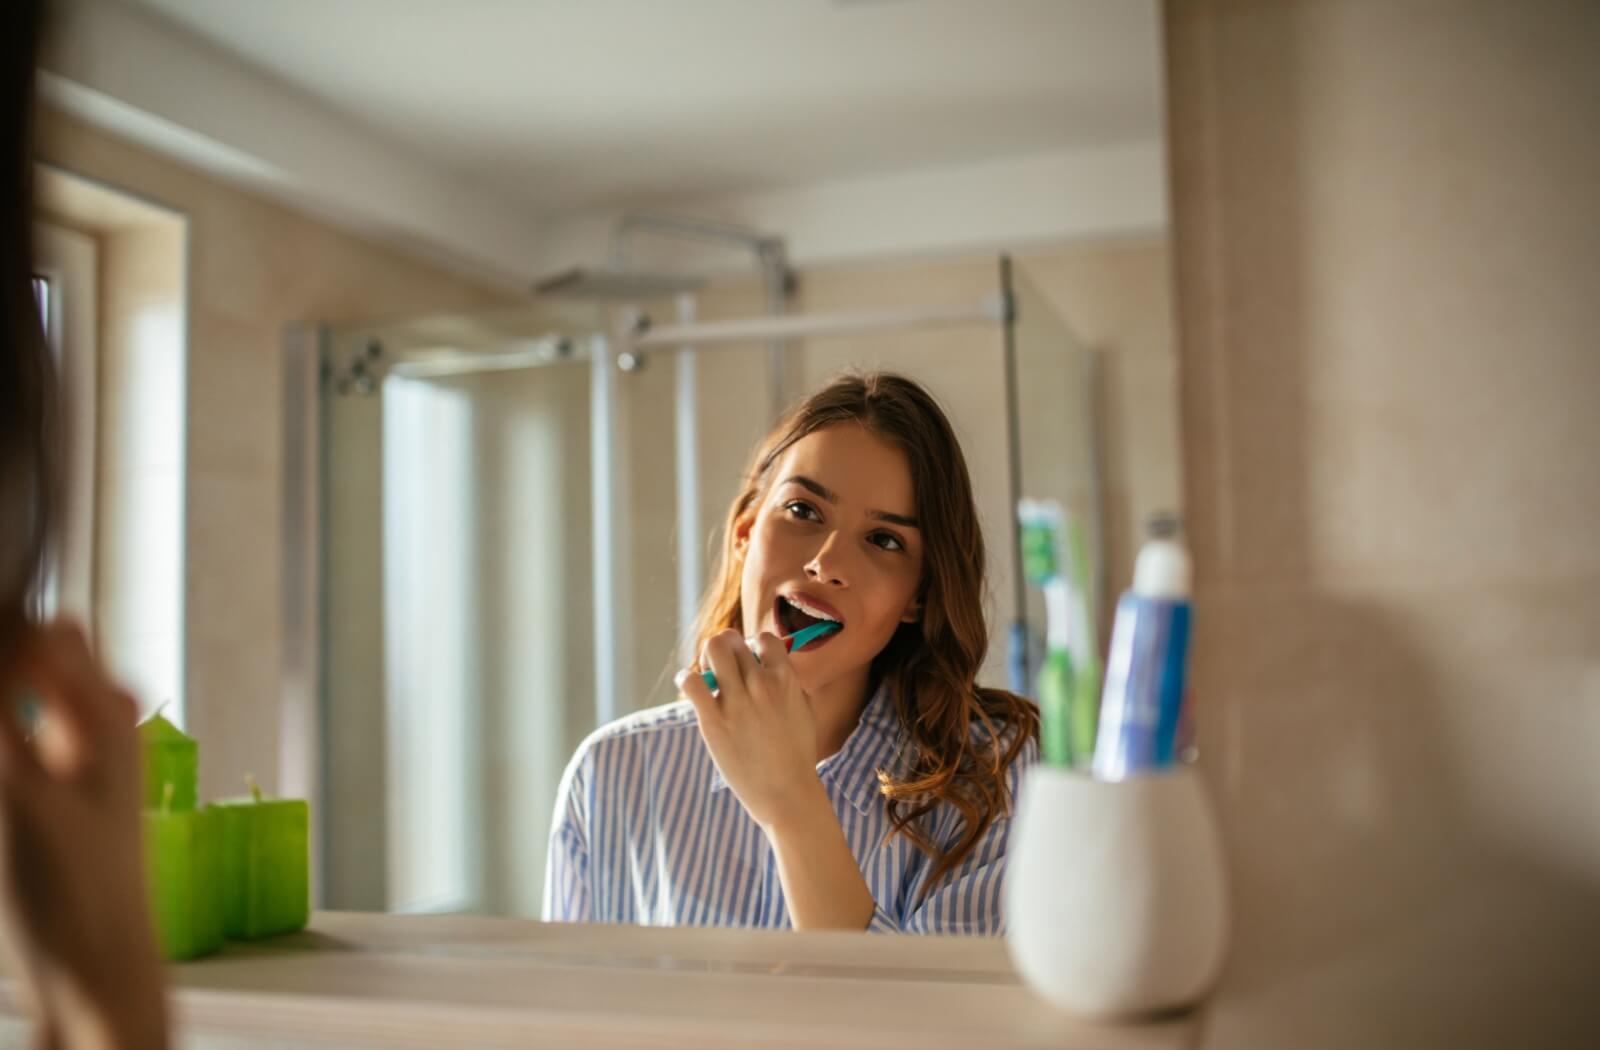 A woman in a striped shirt brushing her teeth in front of a mirror.